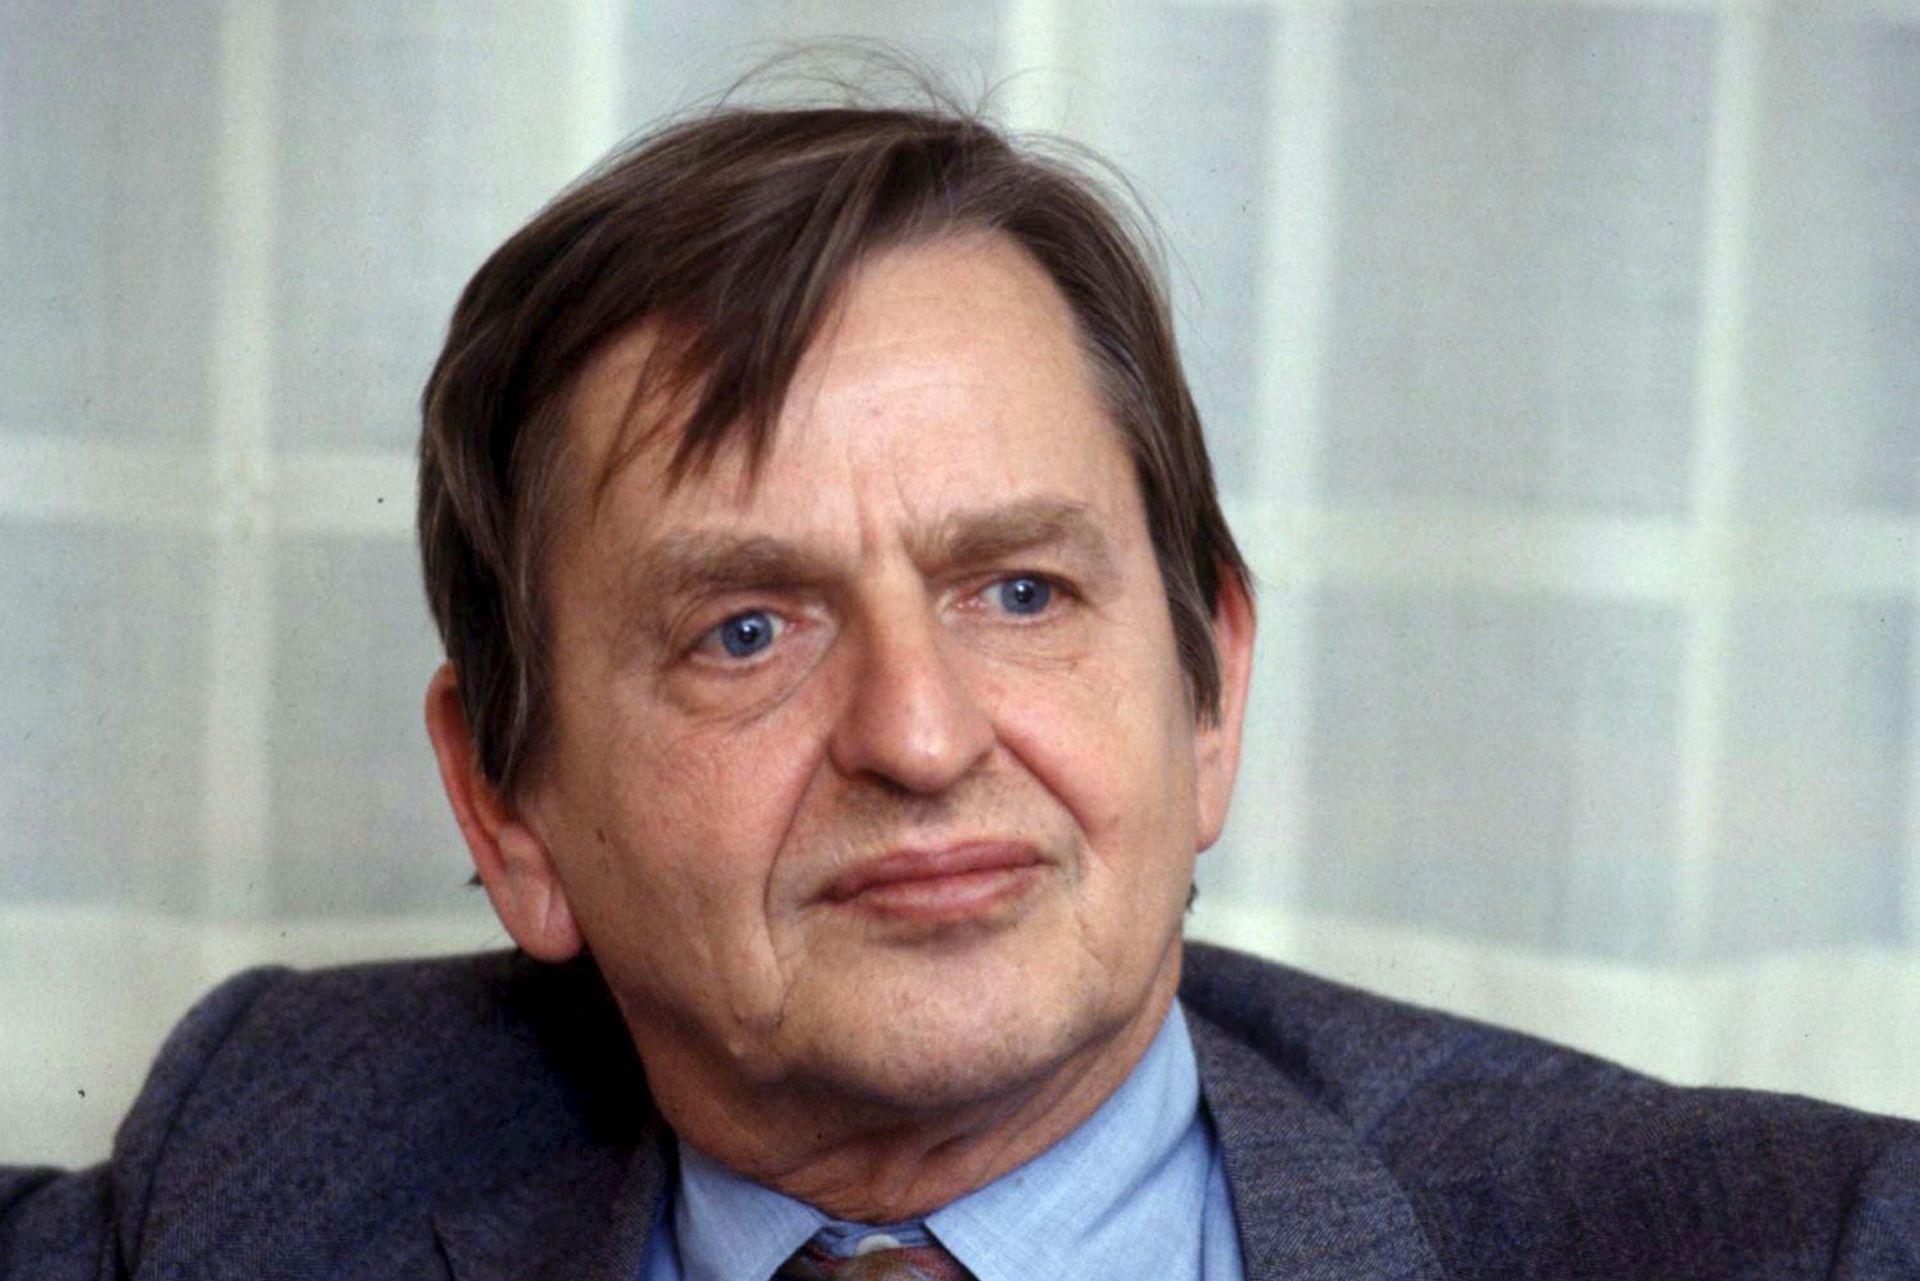 epa08472259 (FILE) - Swedish Prime Minister Olof Palme pictured in Stockholm, Sweden, in 1985 (reissued 08 June 2020). According to reports, Sweden's public prosecutor is to present new findings in the murder case of Palme, which remains unsolved. Olof Palme was shoot dead on a street in Stockholm on 28 February 1986 while walking home from a movie theater with his wife.  EPA/TOBBE GUSTAVSSON SWEDEN OUT *** Local Caption *** 00655313